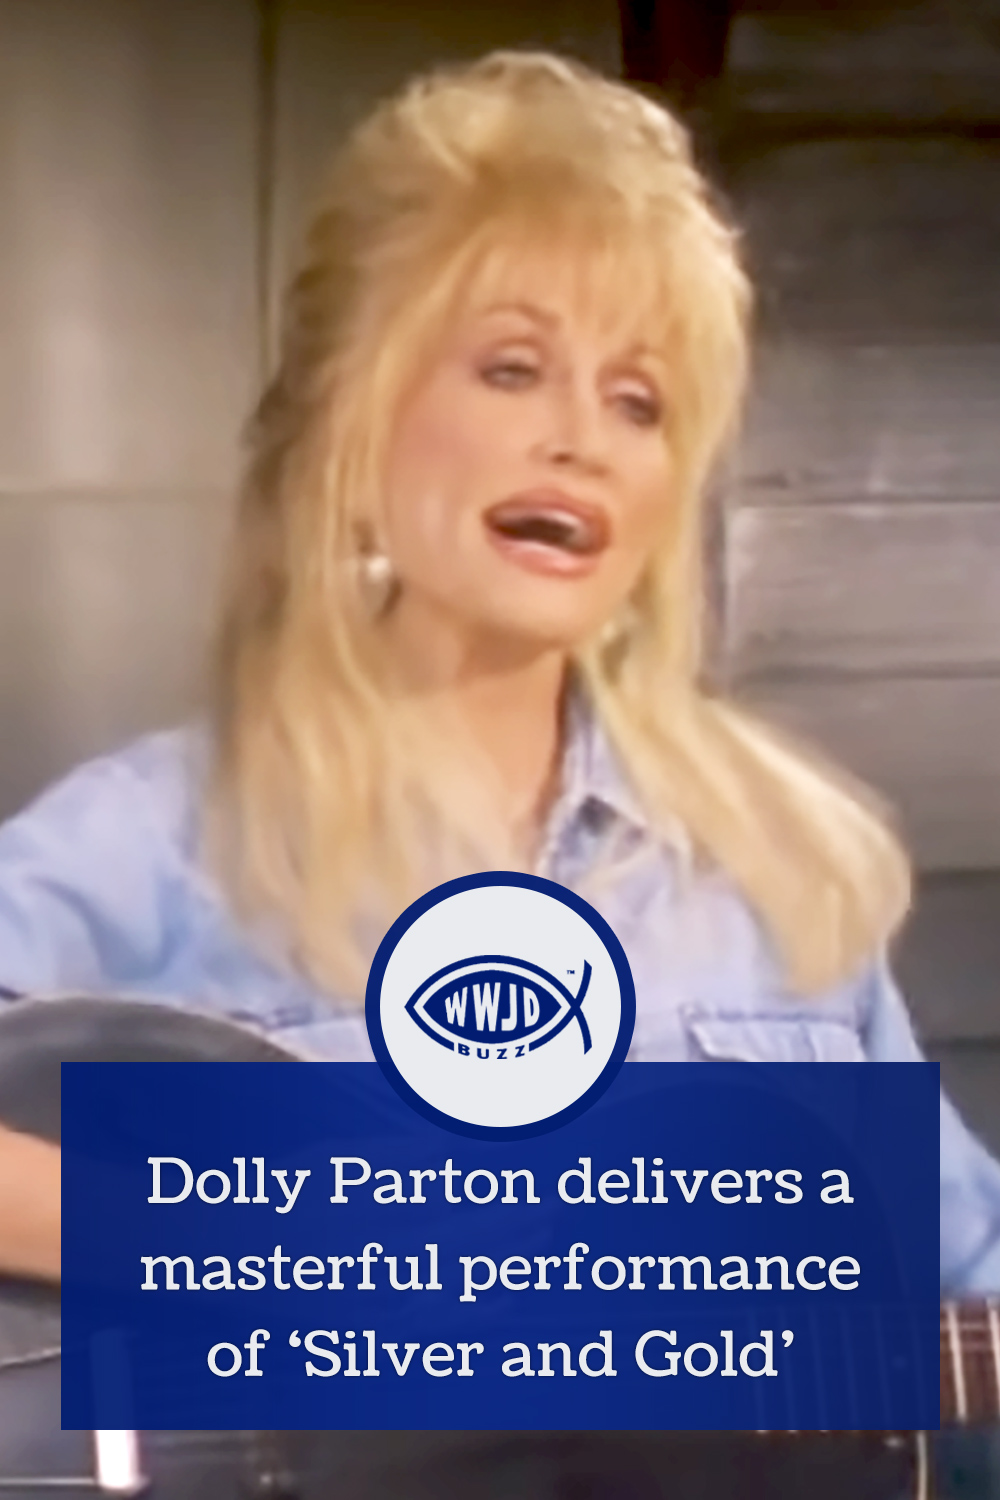 Dolly Parton delivers a masterful performance of ‘Silver and Gold’